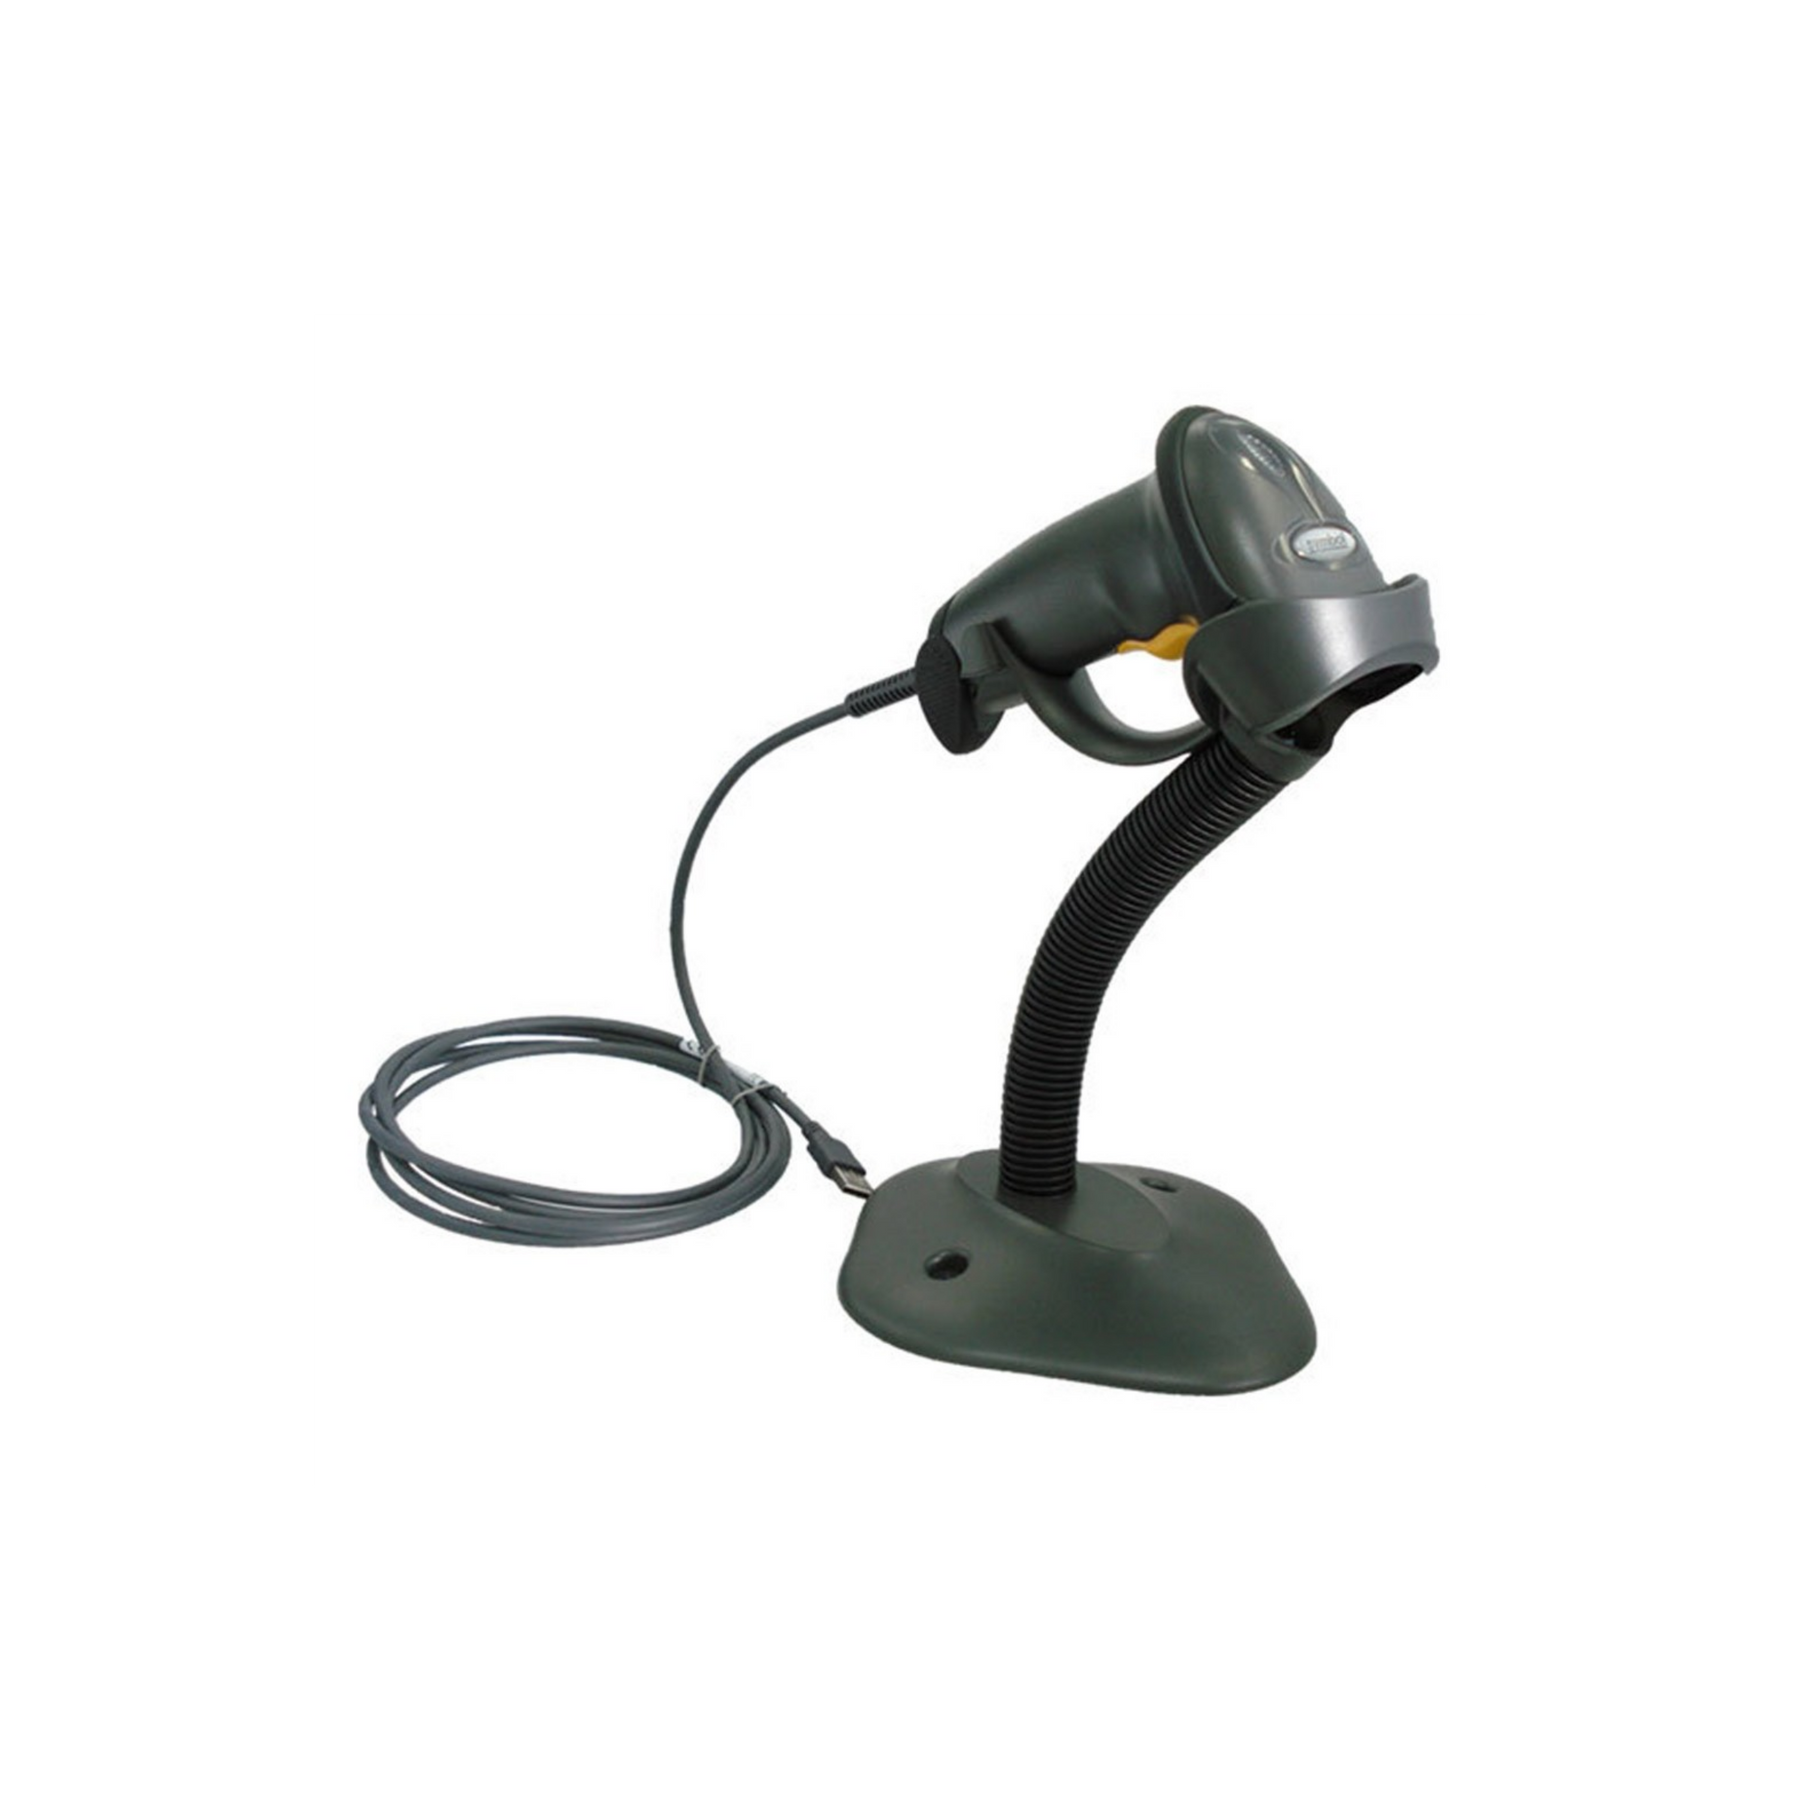 Zebra EVM LS2208, USB, Includes Cable and Stand